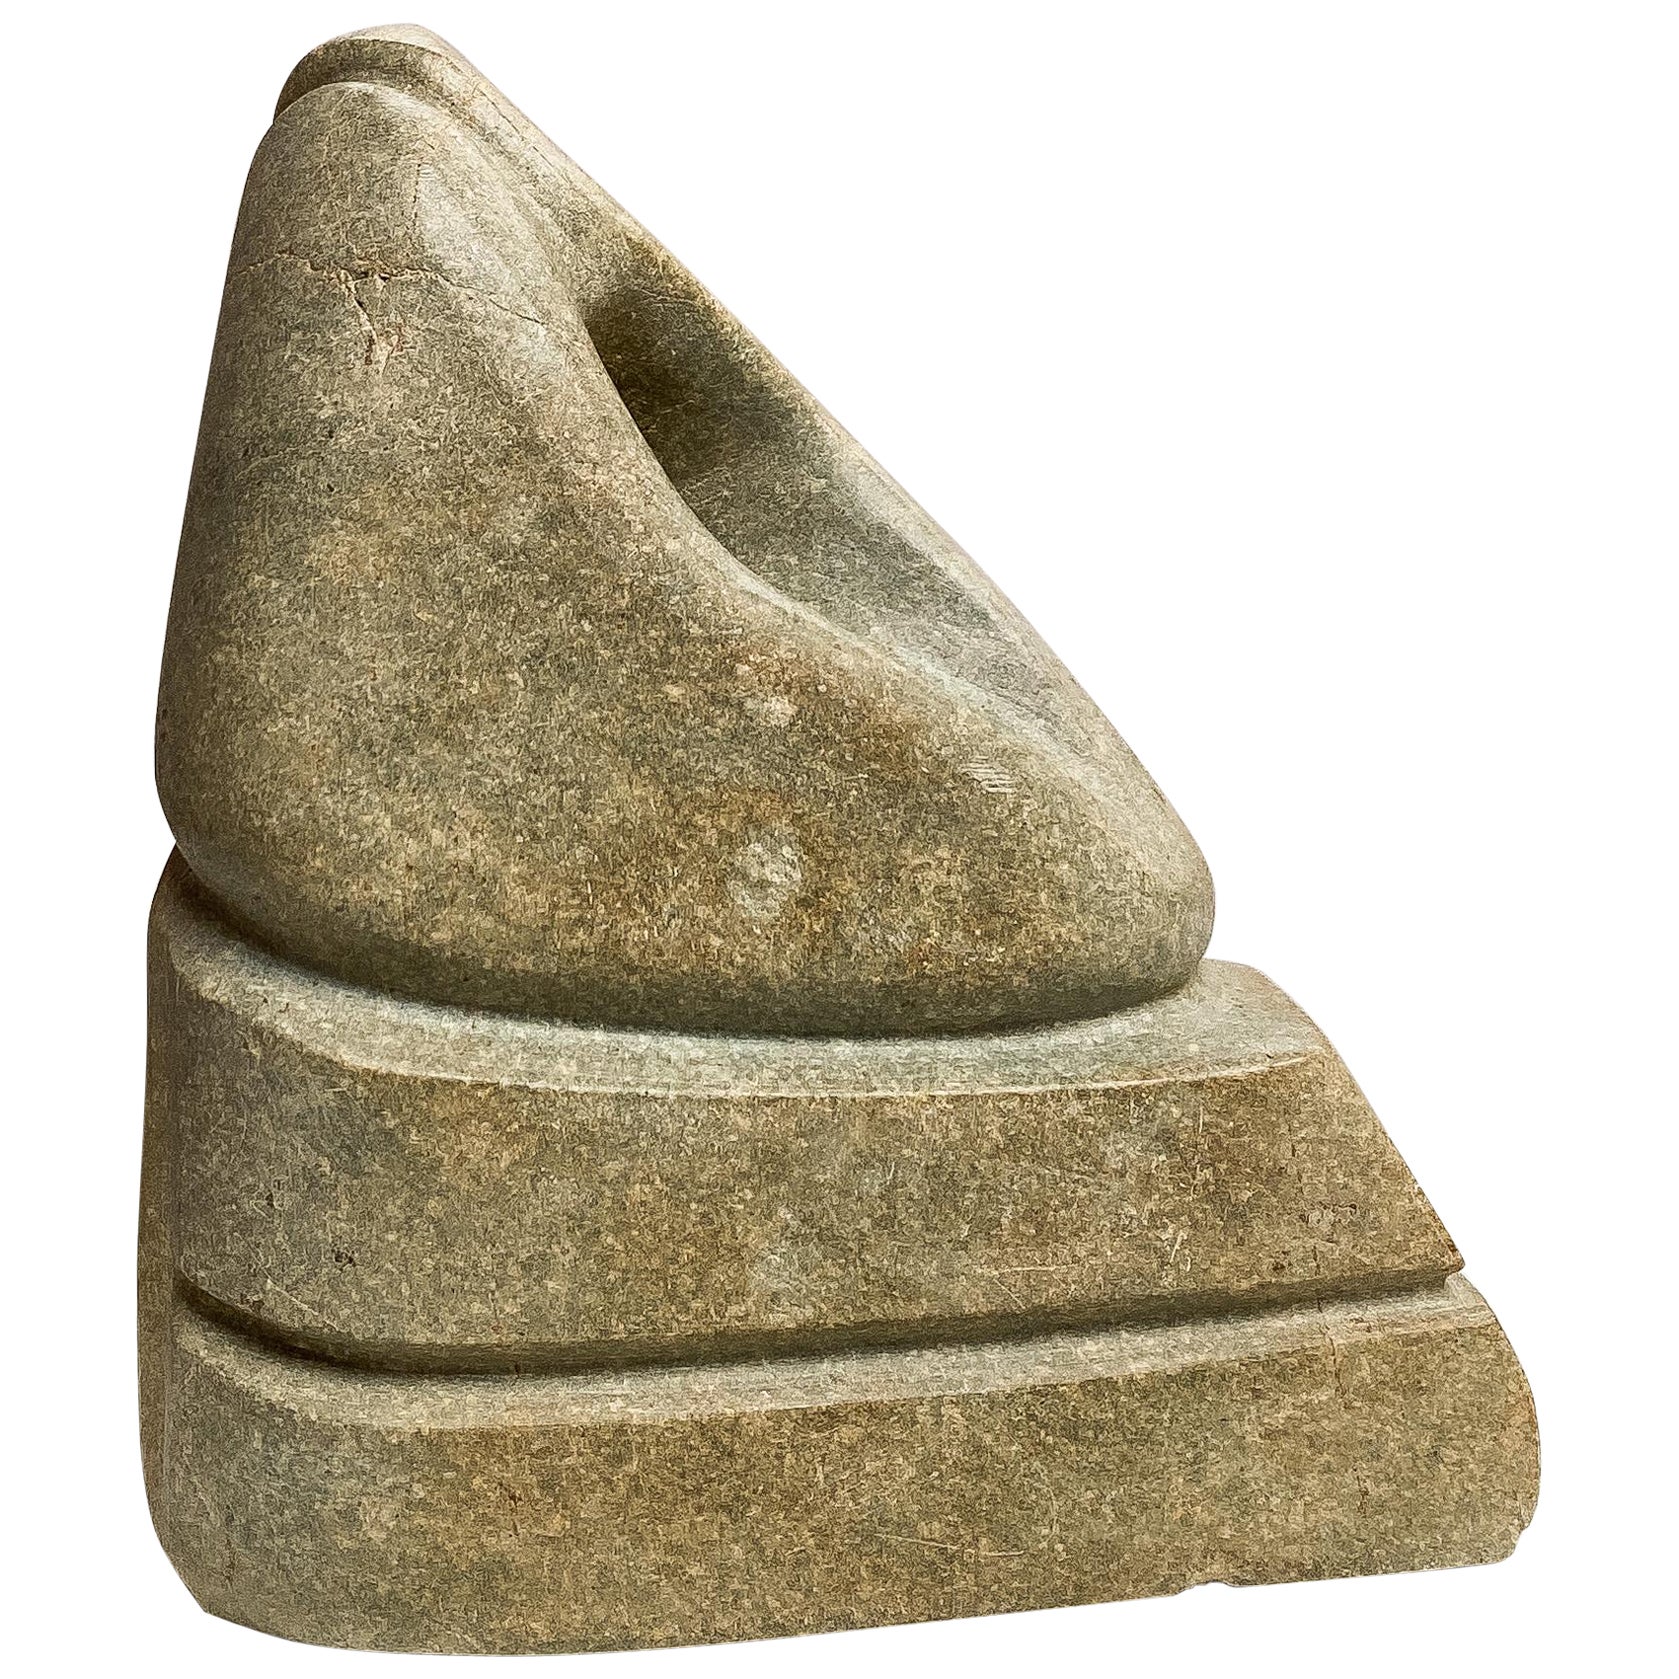 Organic shaped Abstract Mid-Century Sculpture in Greenish Stone, Hand Carved